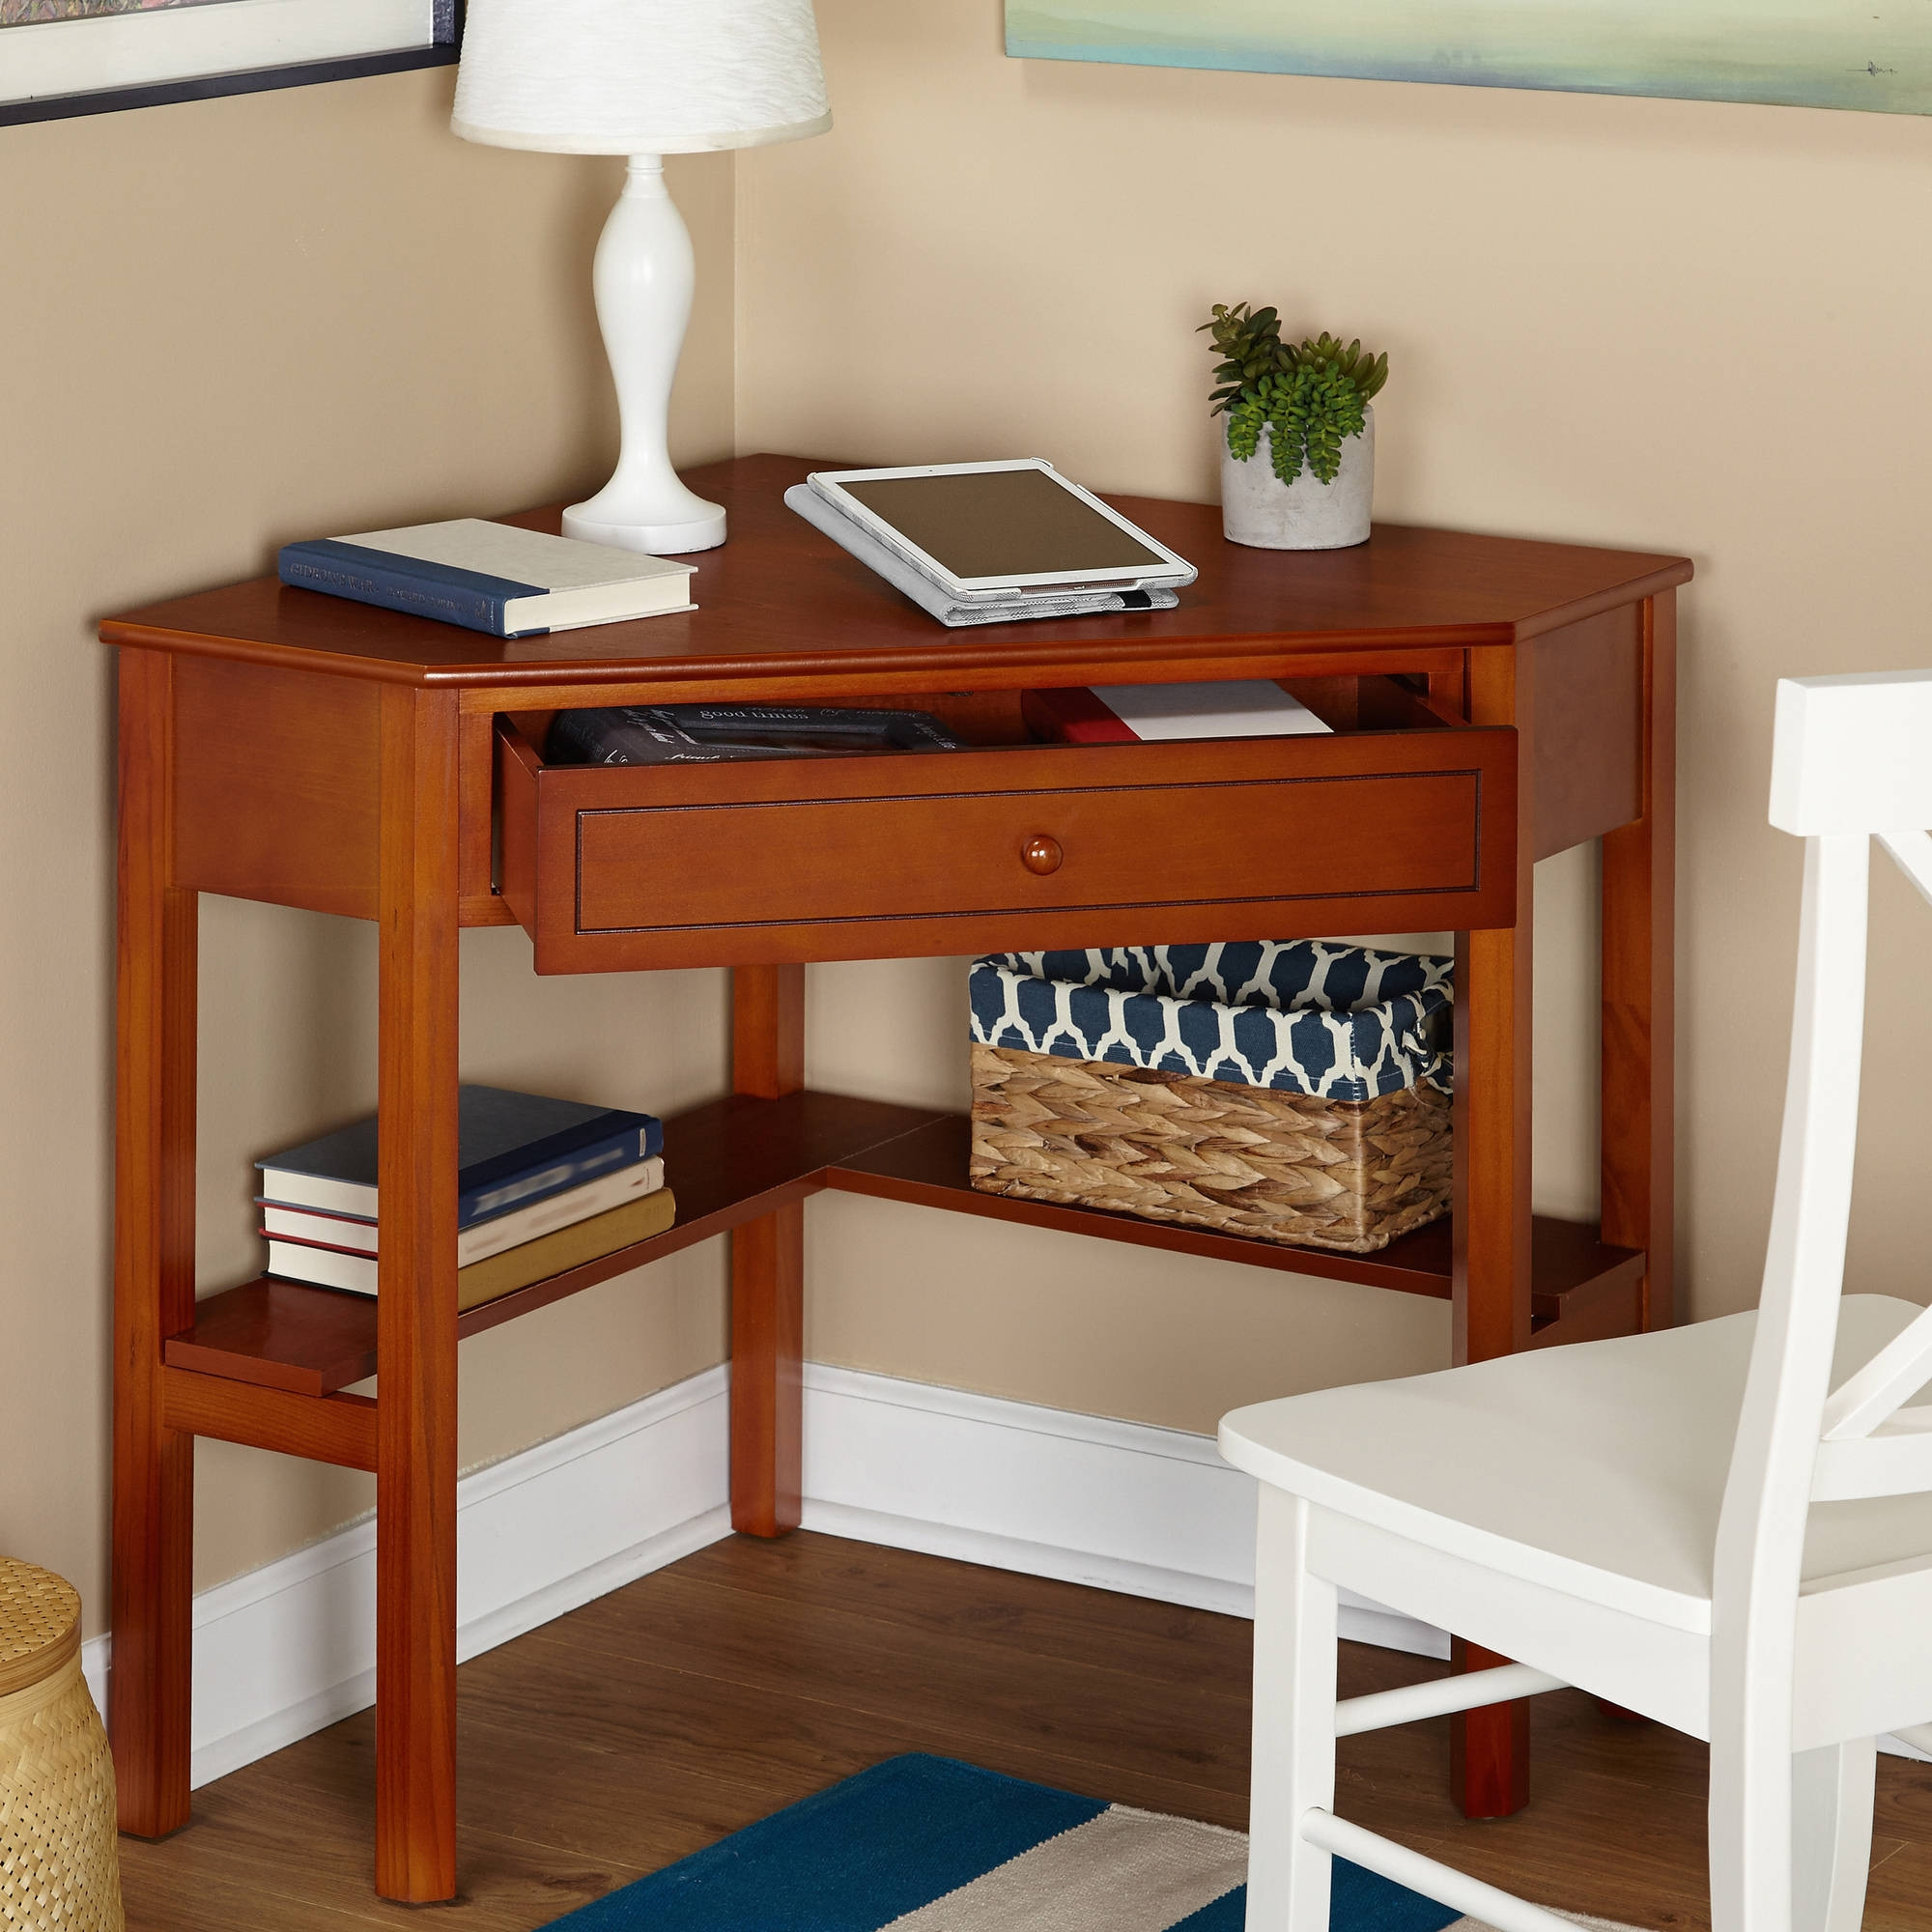 Small Writing Desk For Bedroom
 Small Writing Desk For Bedroom Ideas With Drawers Desks